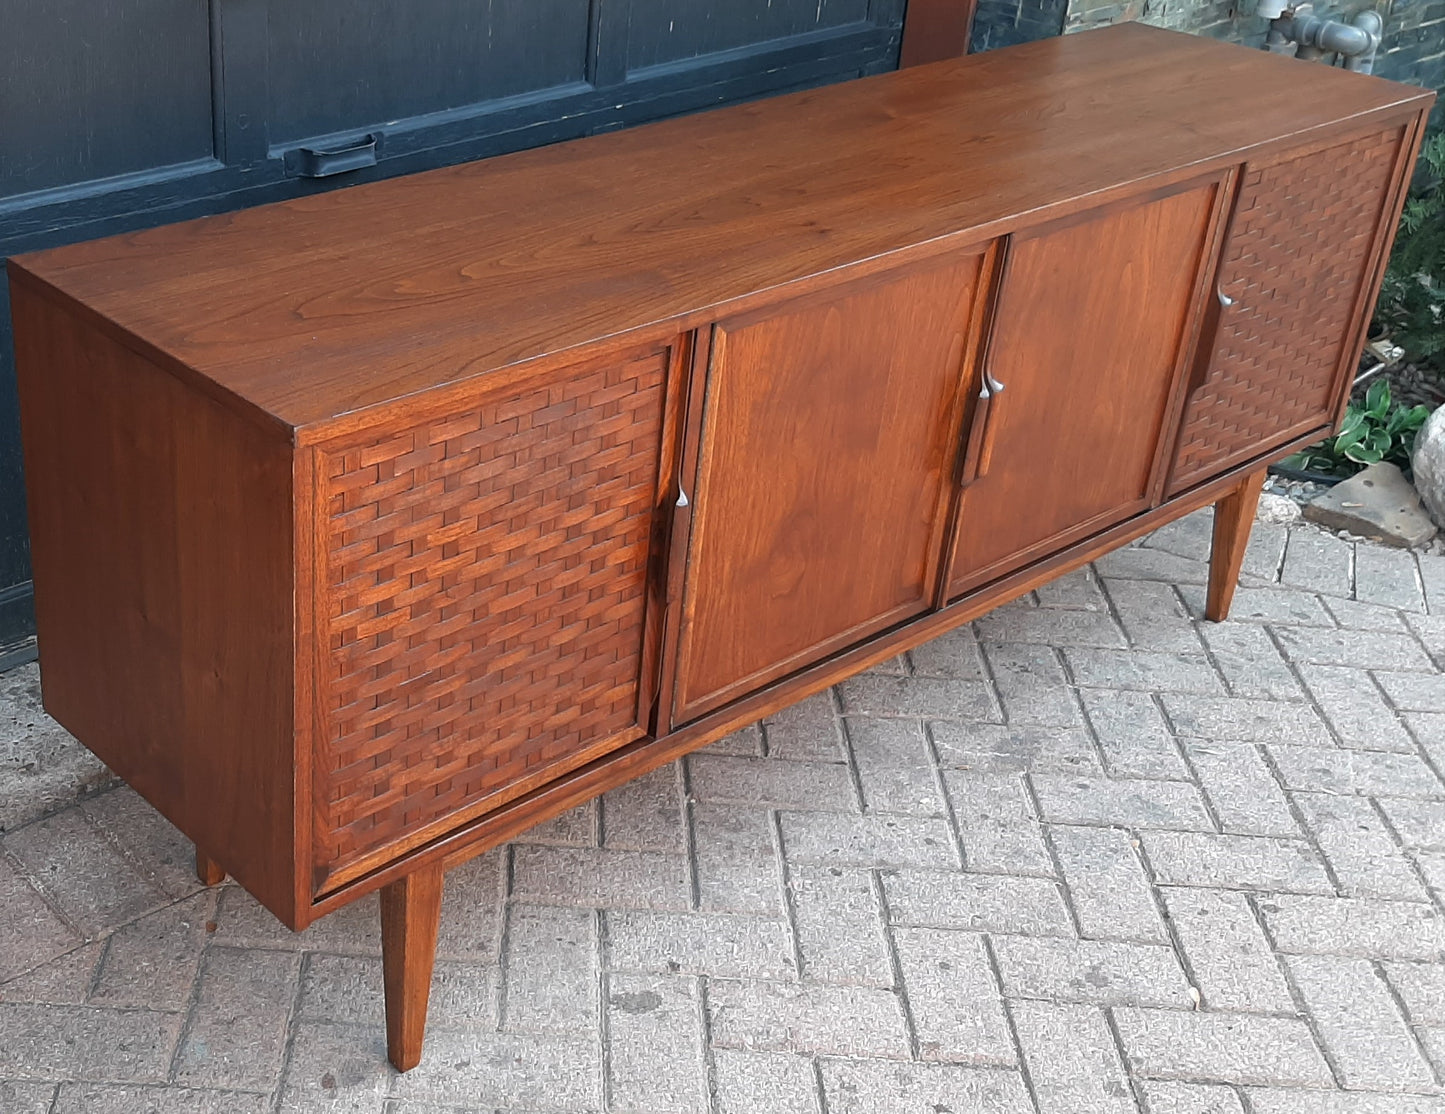 REFINISHED MCM Walnut Credenza Sideboard with woven doors 6ft